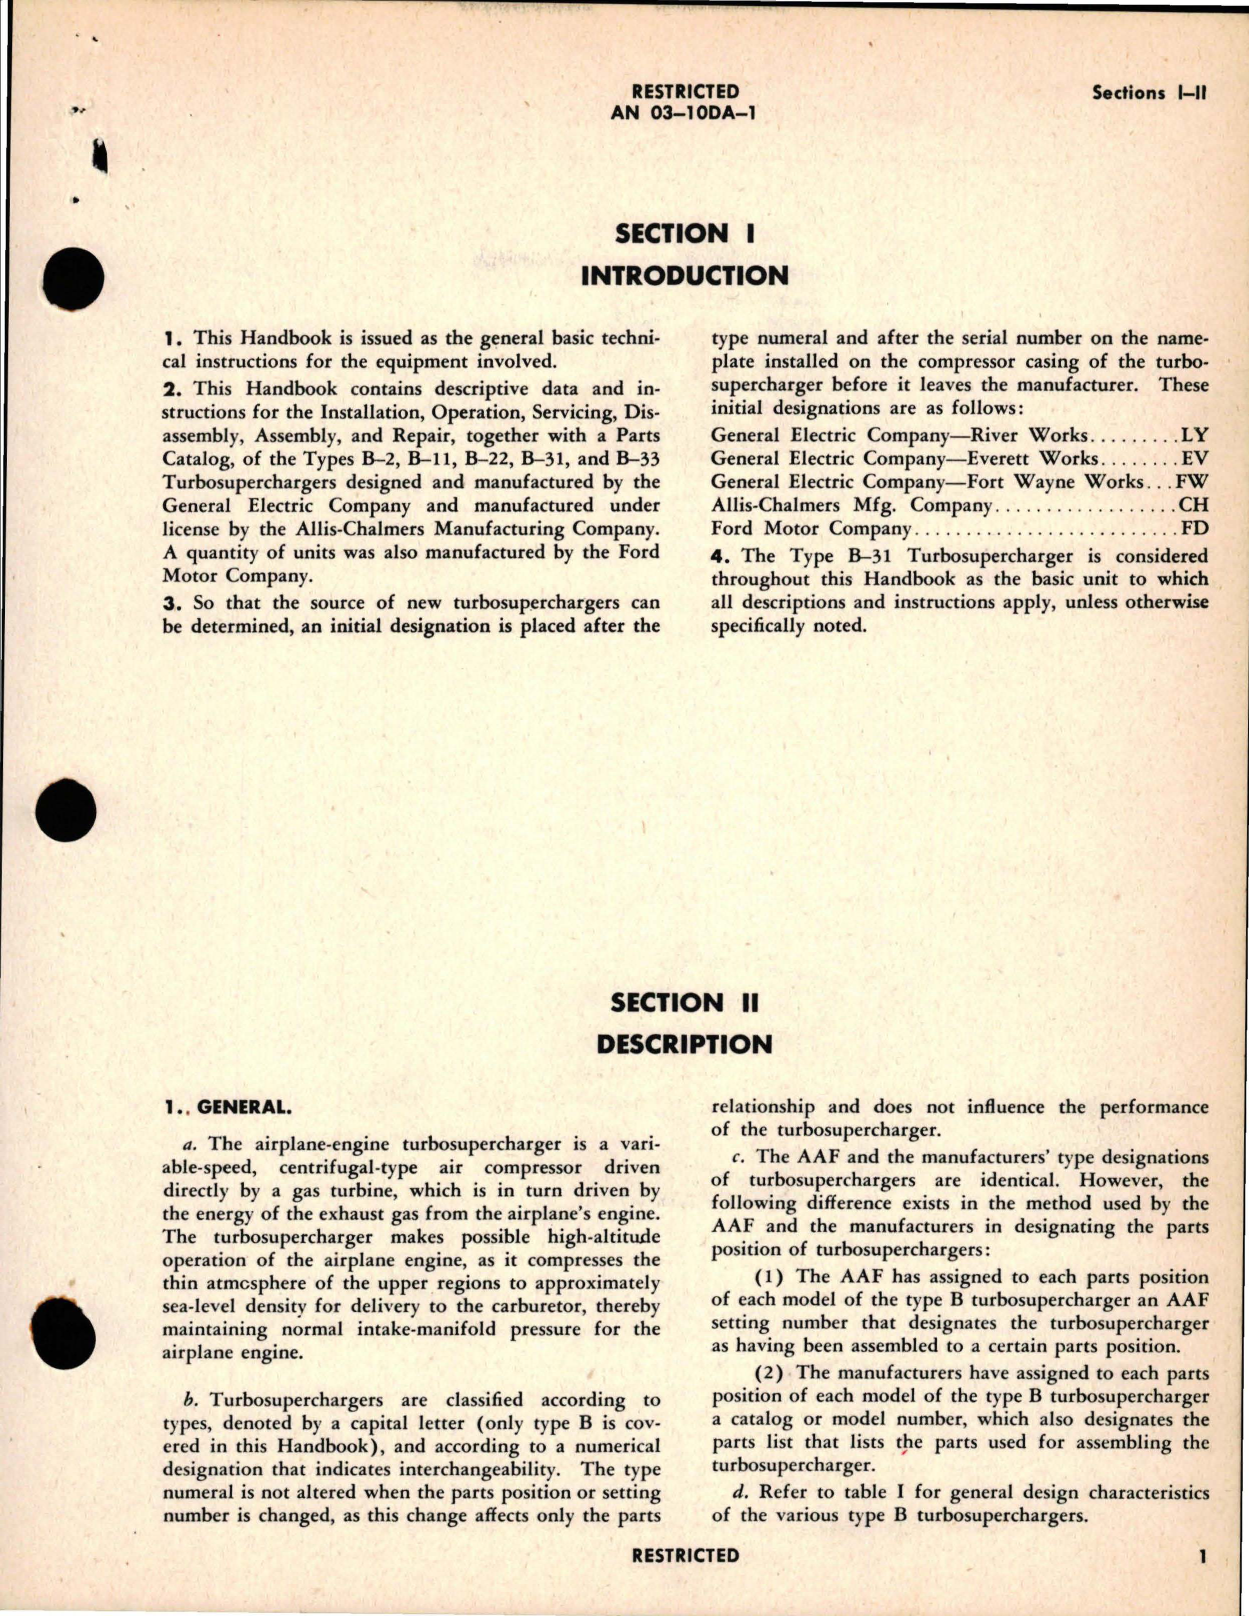 Sample page 7 from AirCorps Library document: Operation, Service and Overhaul Instructions with Parts Catalog for Turbosuperchargers - Types B-2, B-11, B-22, B-31, and B-33 